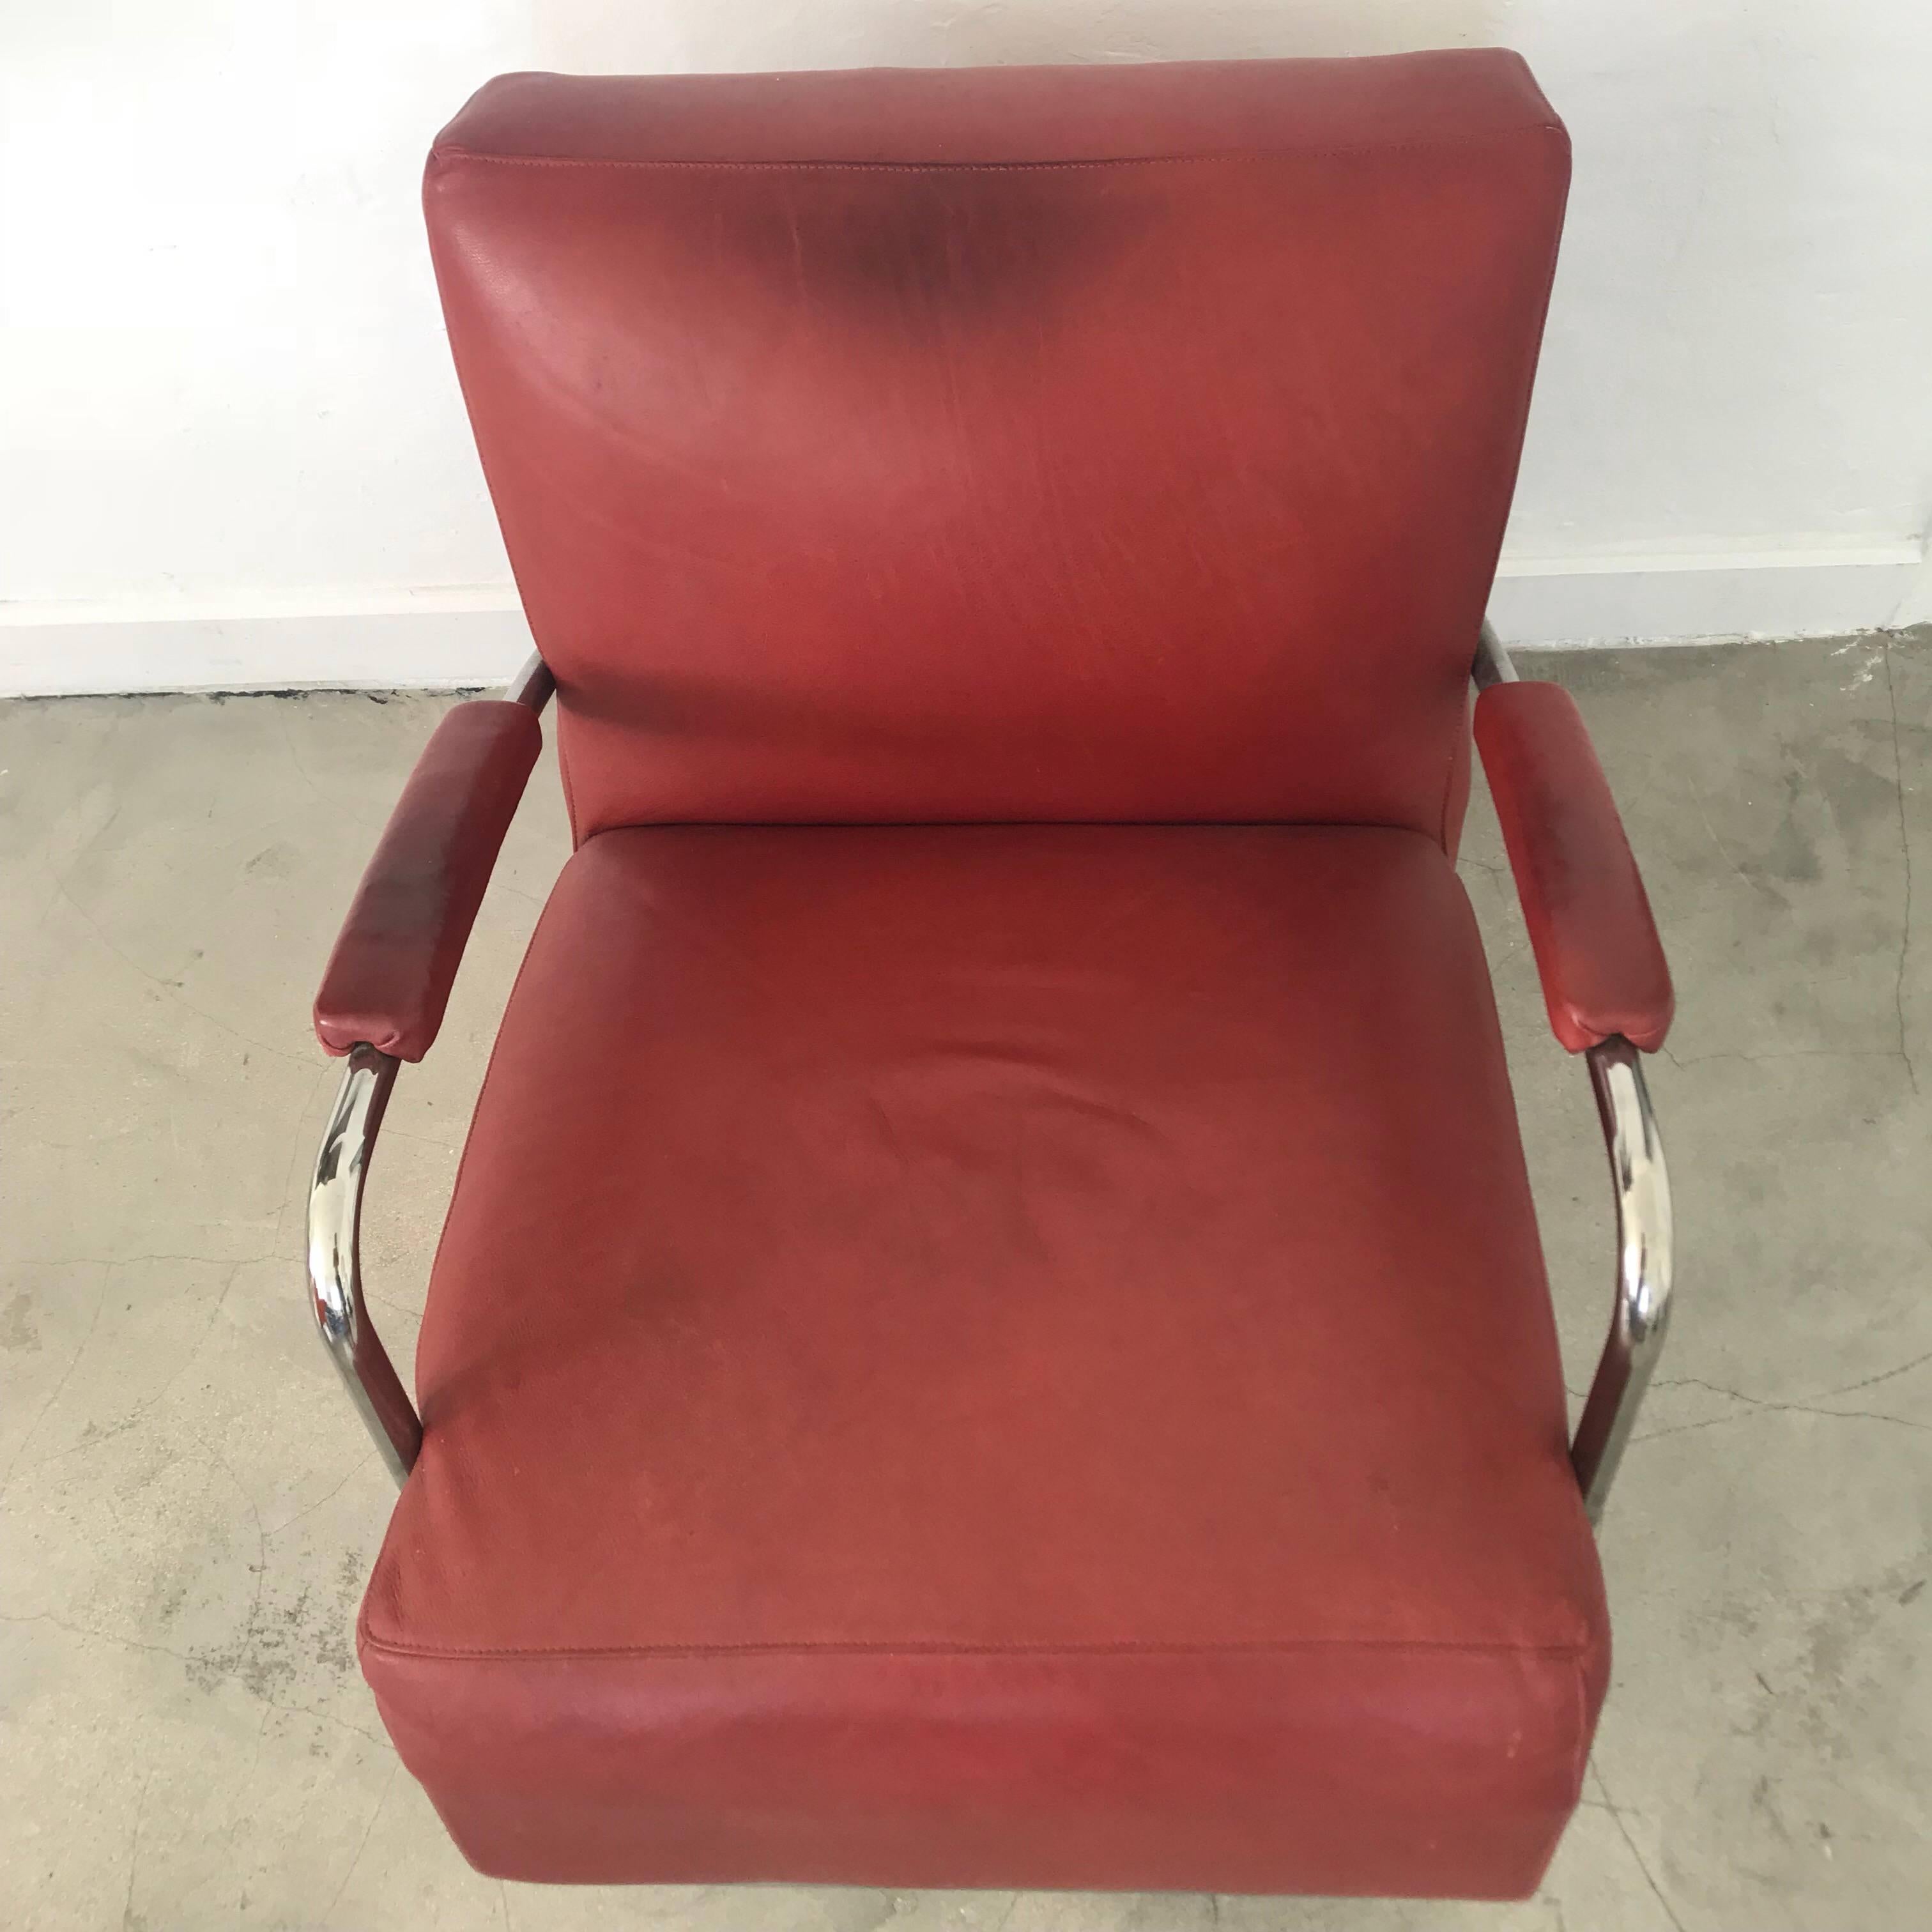 20th Century Art Deco Tubular Chrome and Red Leather Chair